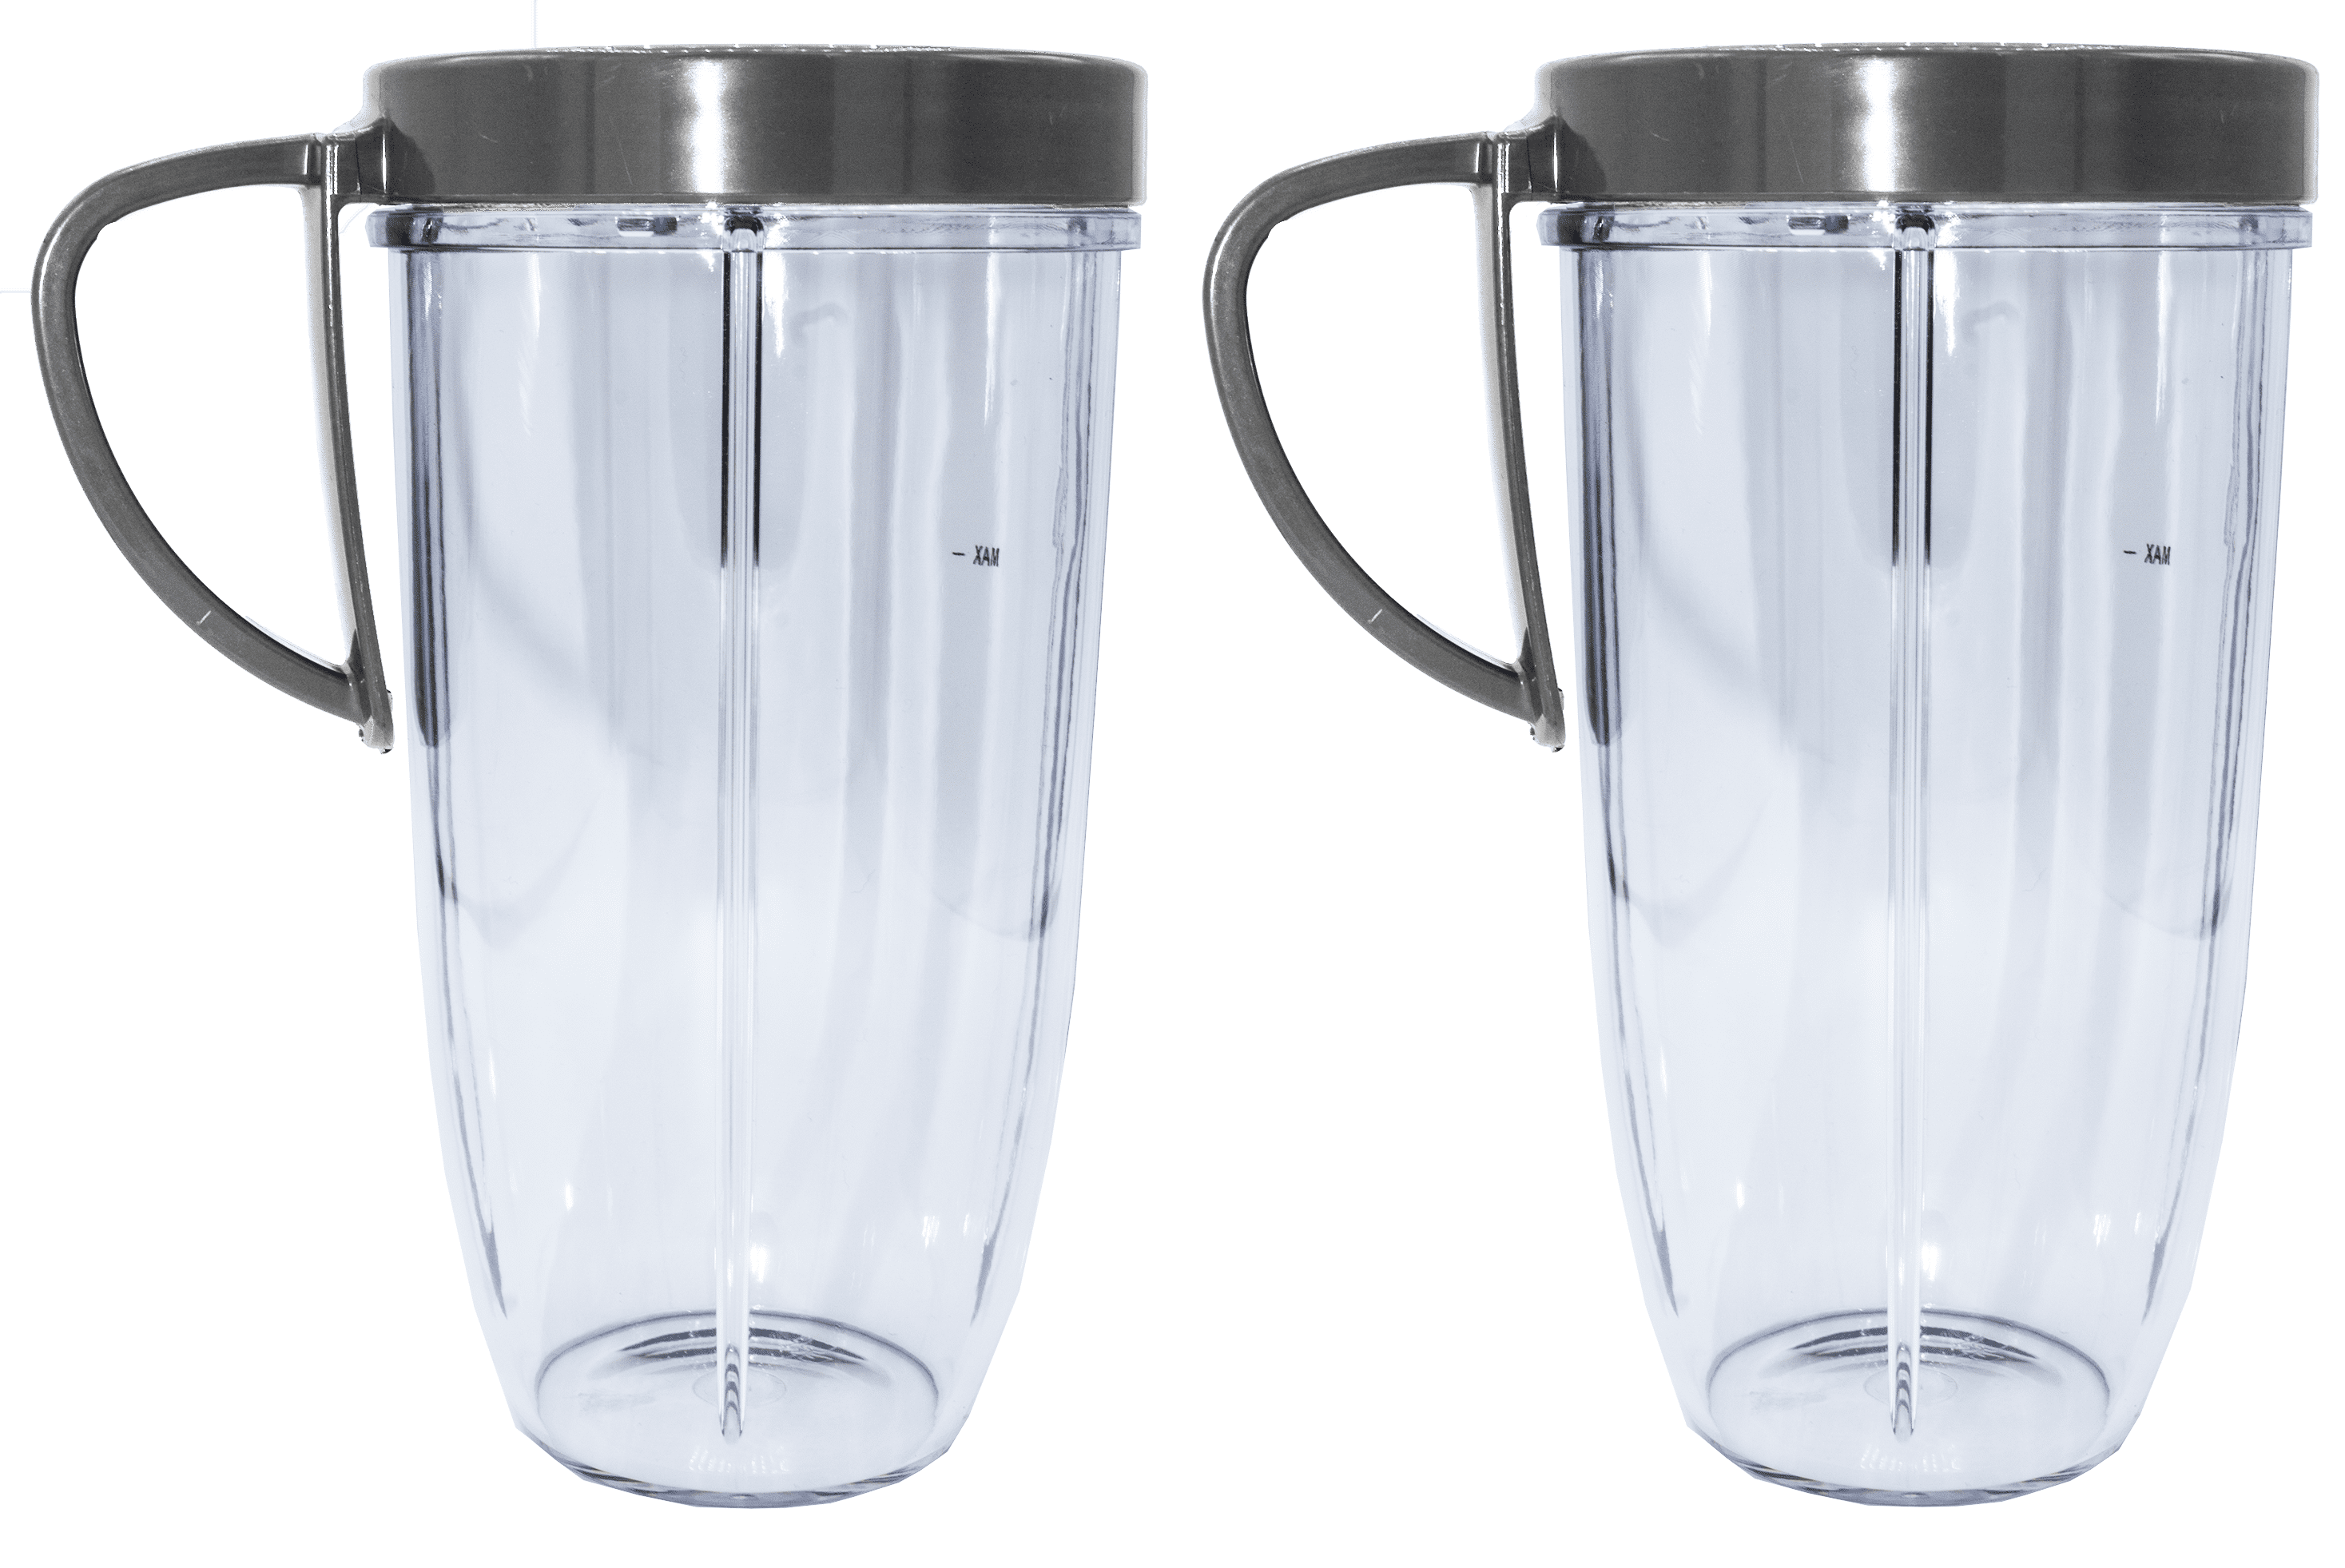 Blendin 2 Pack Extra Large Colossal 32 Ounce Cup with Lip Rings,Fits Nutribullet  Blenders - Bed Bath & Beyond - 16418032